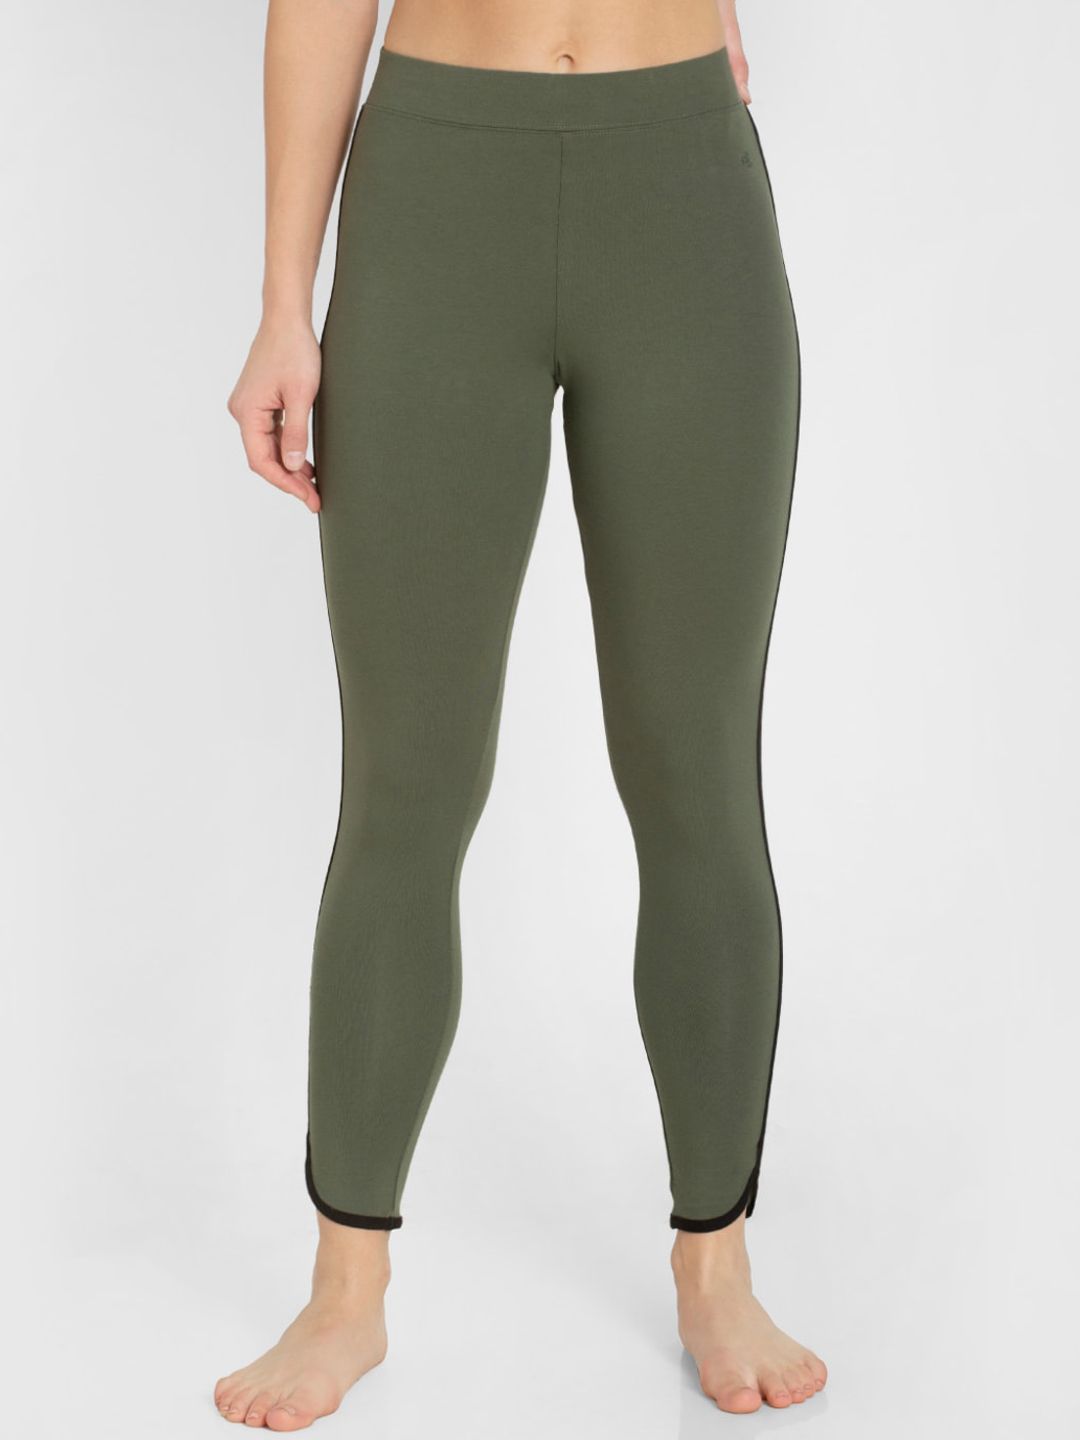 Jockey Women Olive Green Solid Yoga Tights Price in India